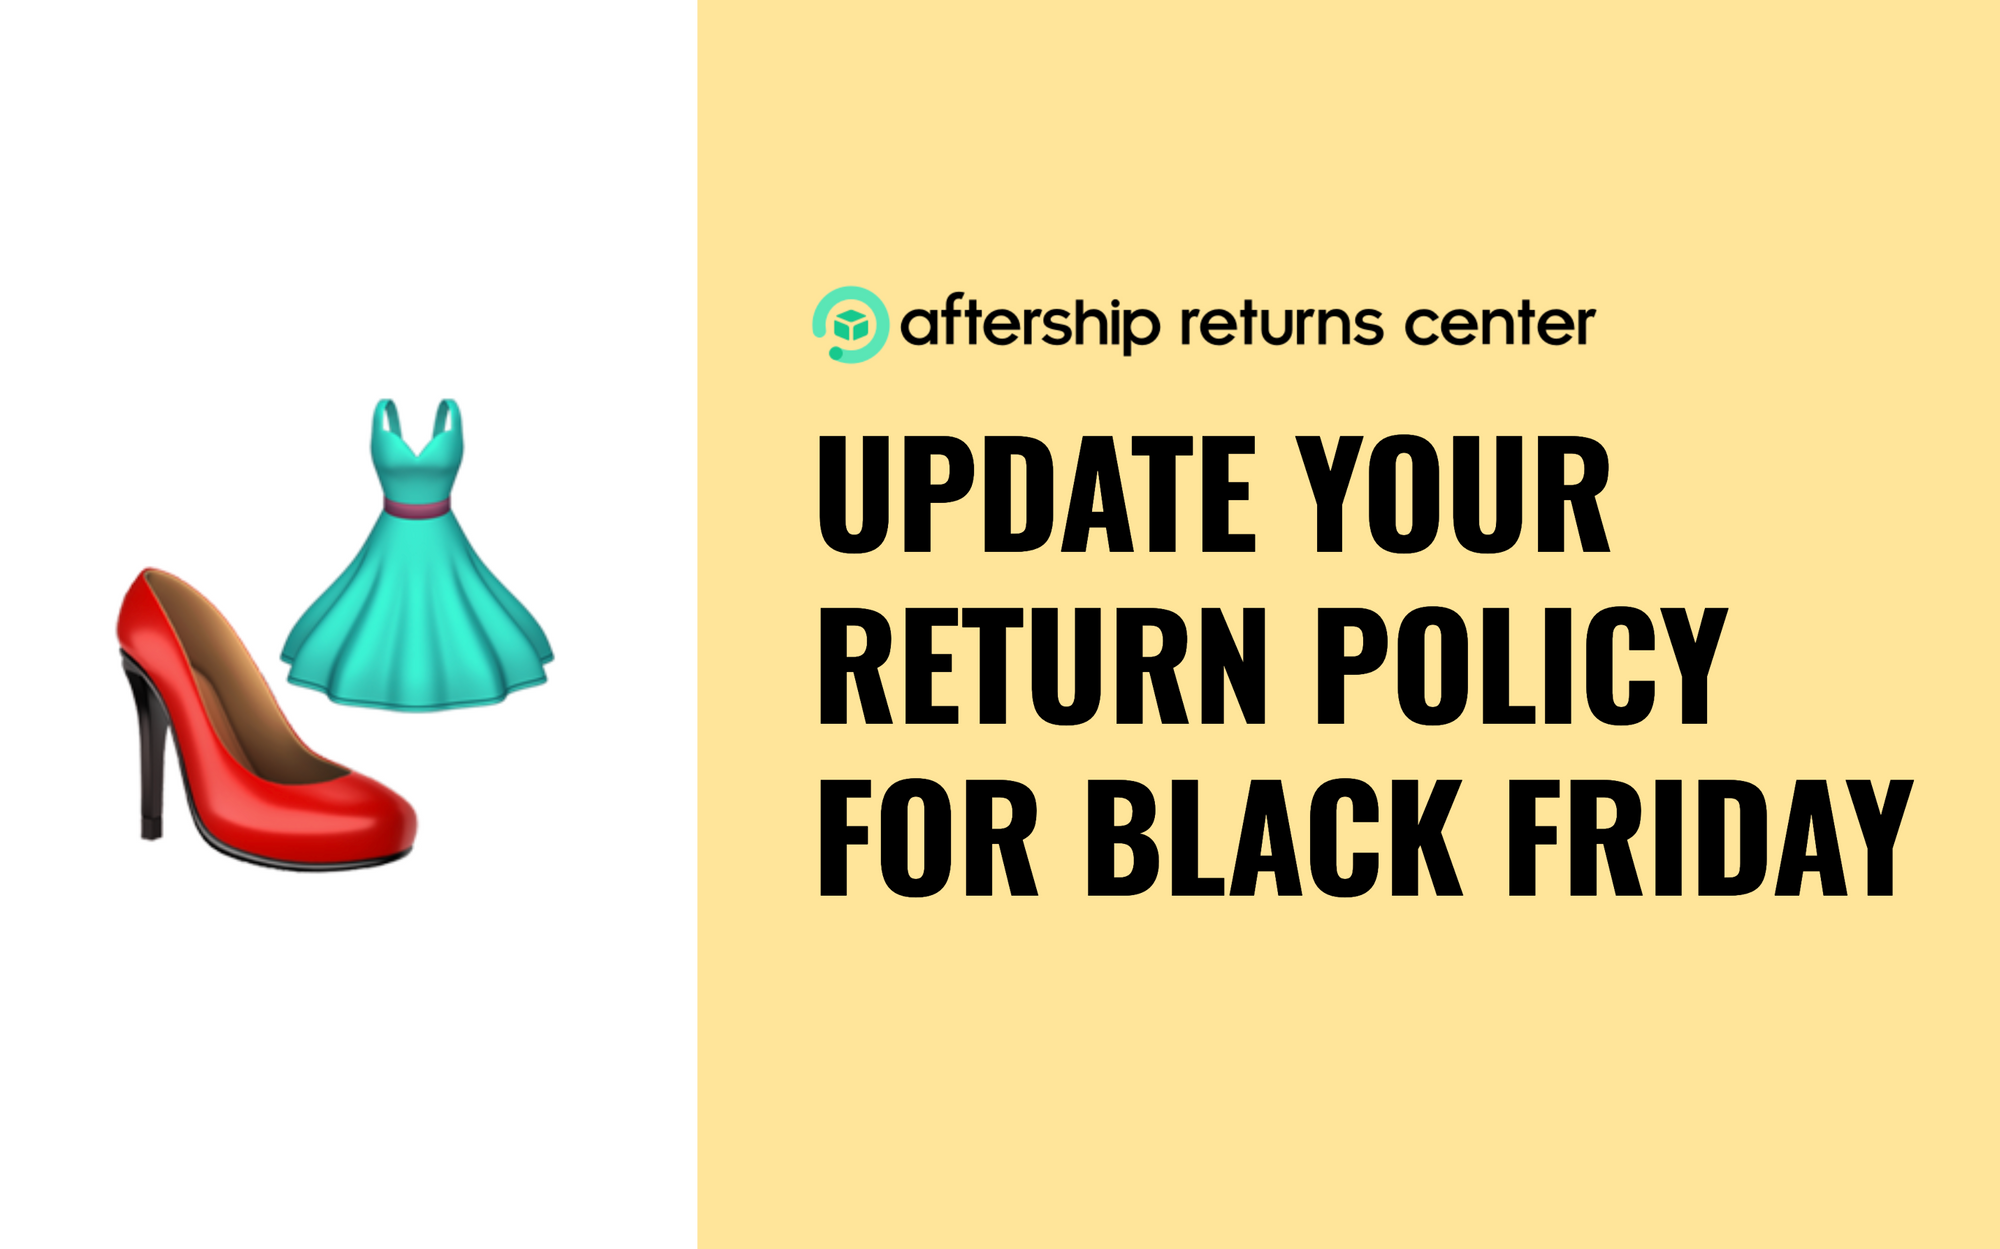 Black Friday is here! Time to update your return policy